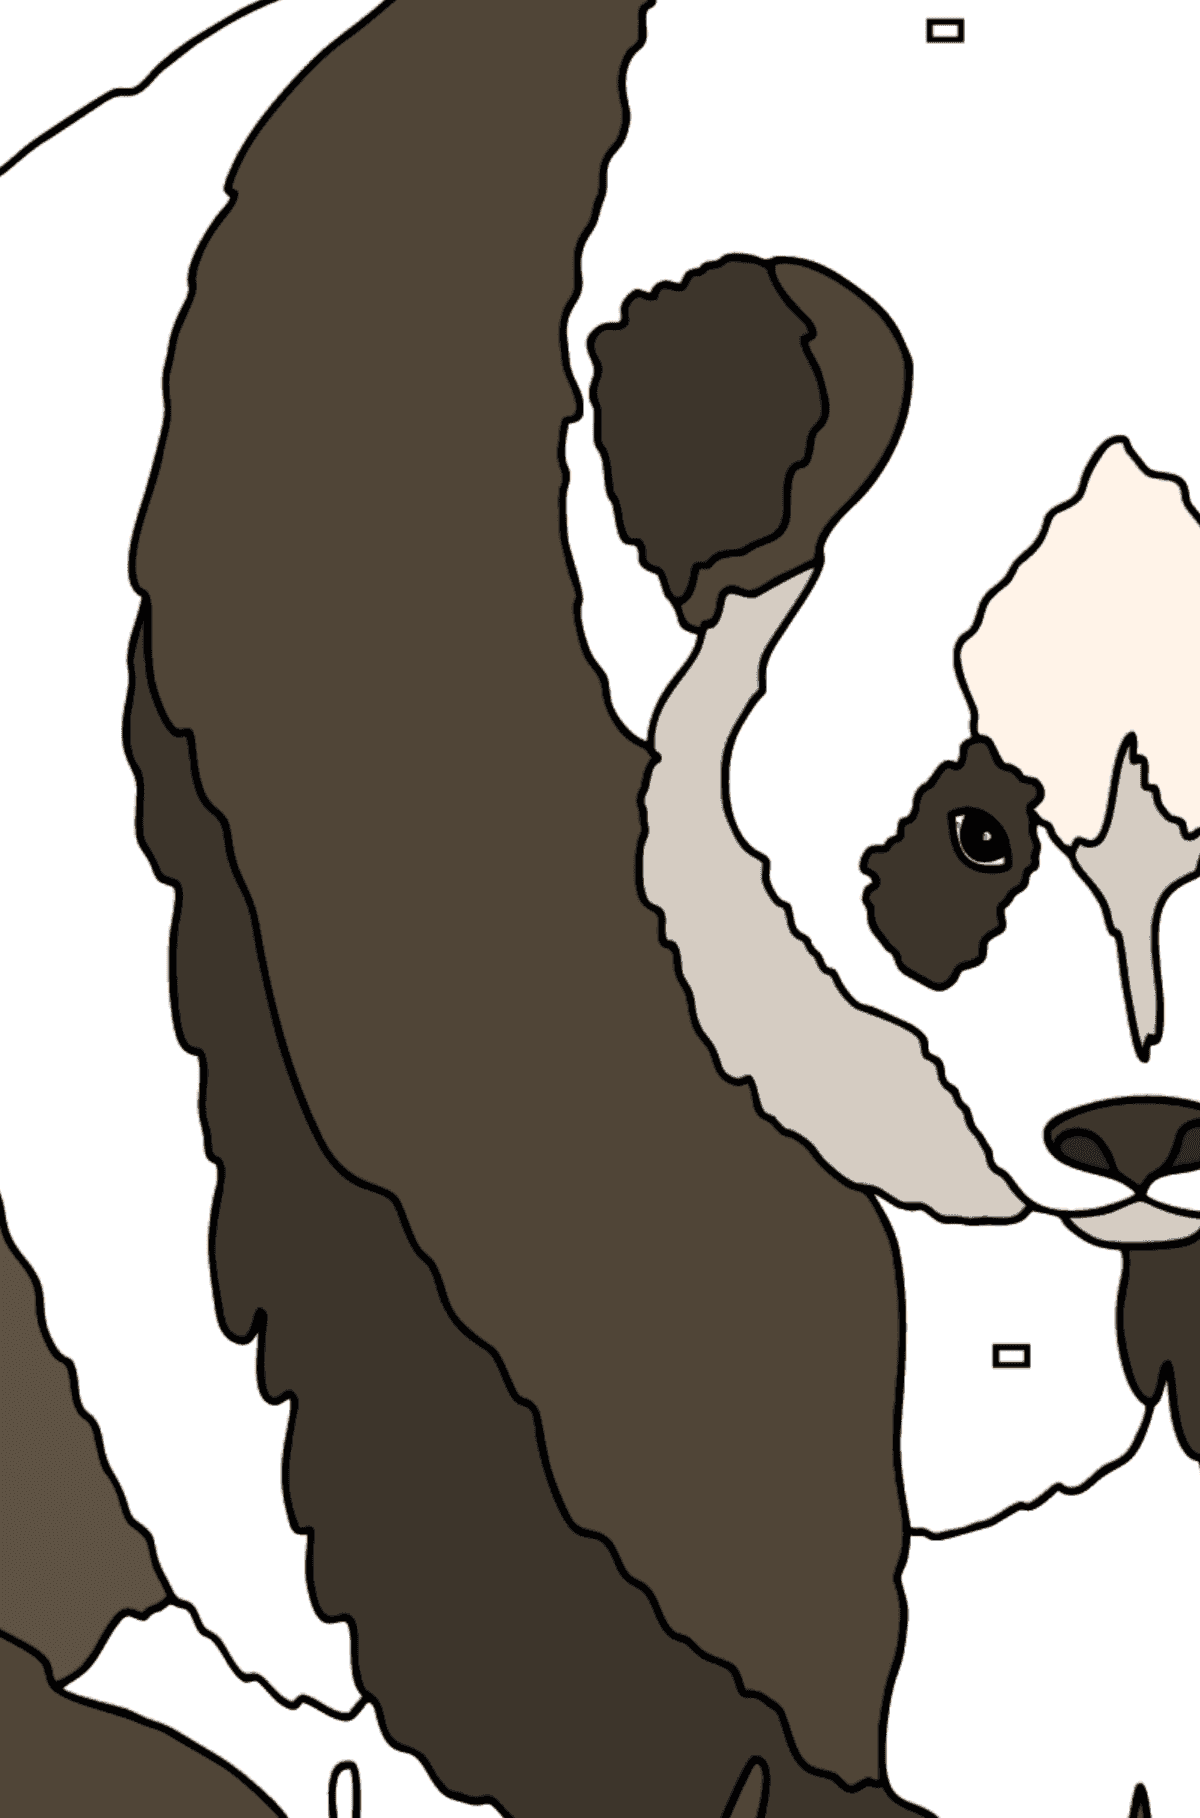 Coloring Page - A Panda is on a Hunt - Coloring by Geometric Shapes for Kids